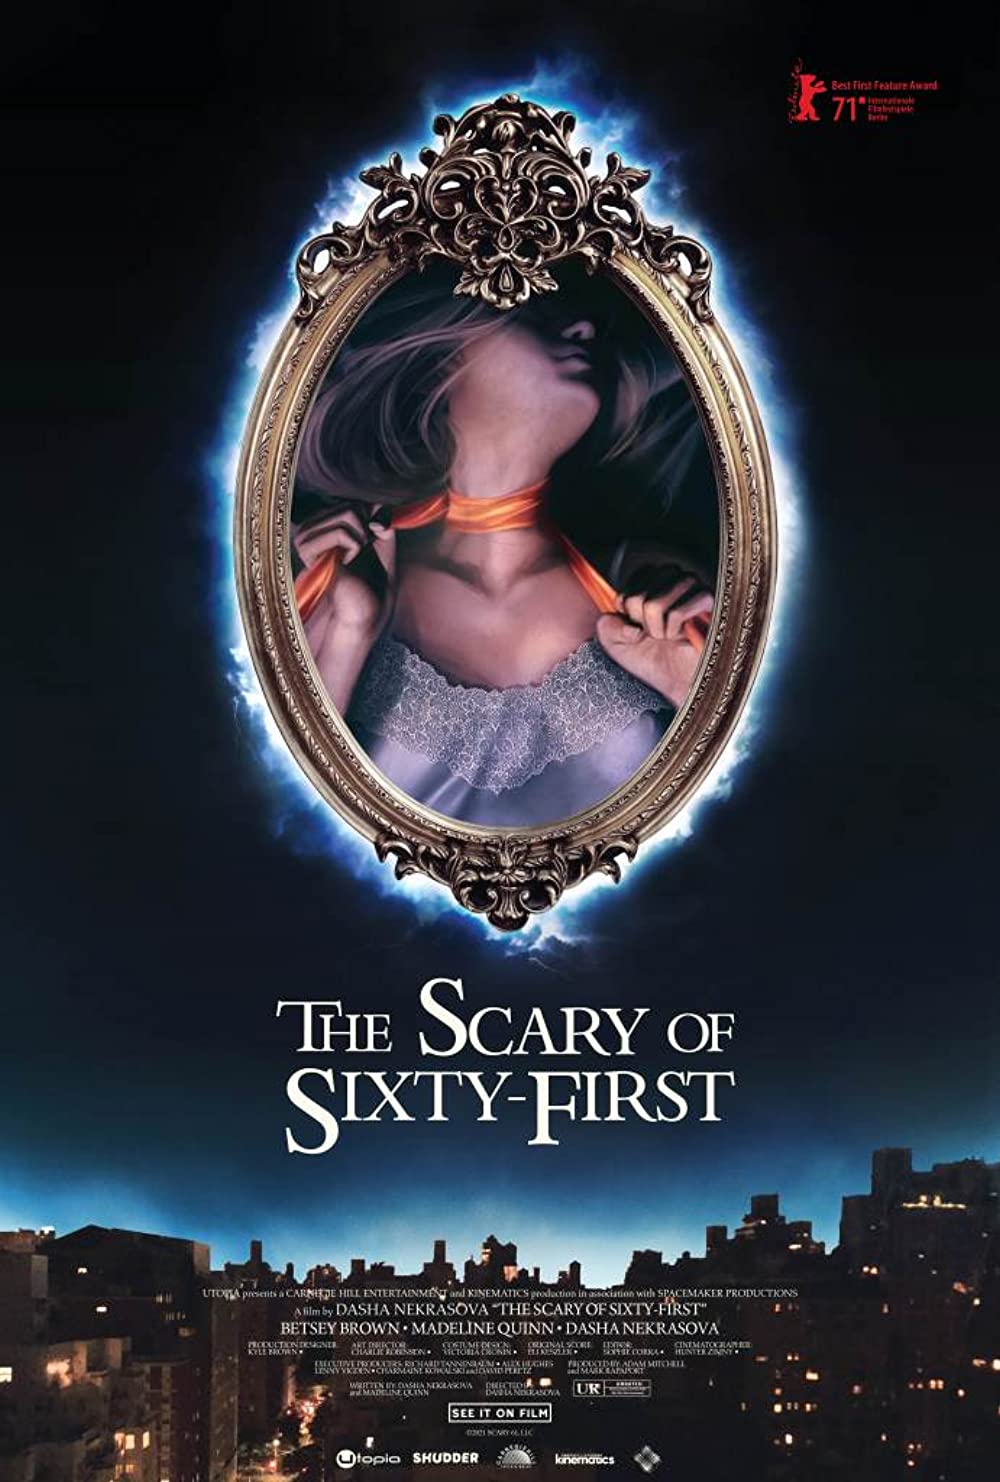 18+ The Scary of Sixty First 2021 English Full Movie 1080p HDRip 1.45GB Download